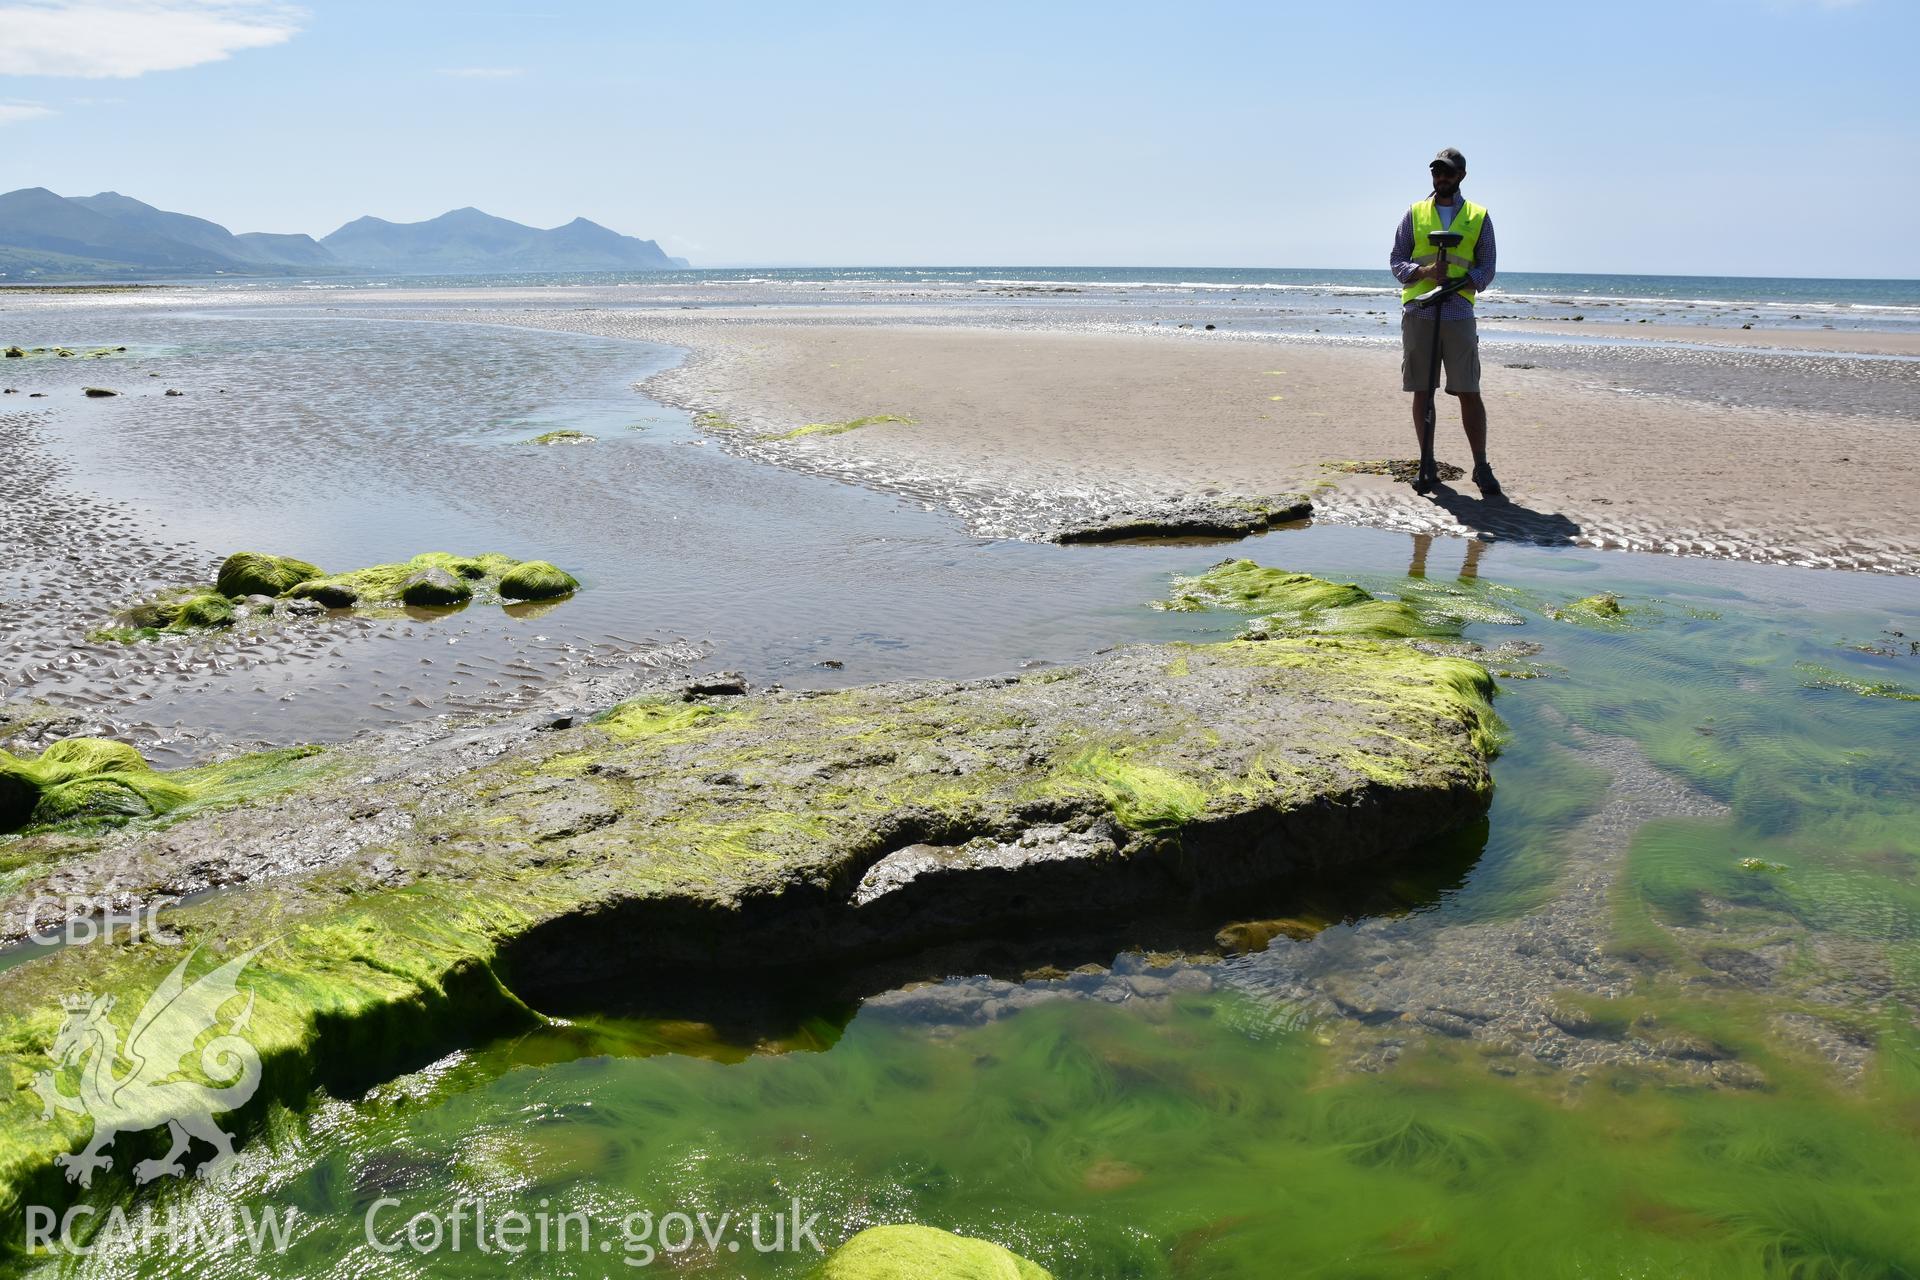 Member of the CHERISH team surveying on the beach at Dinas Dinlle. Photograph taken in June 2018 as part of repeat monitoring and survey by the CHERISH project. © Crown: CHERISH PROJECT 2018 Produced with EU funds through the Ireland Wales Co-operation Programme 2014-2023. All material made freely available through the Open Government Licence.